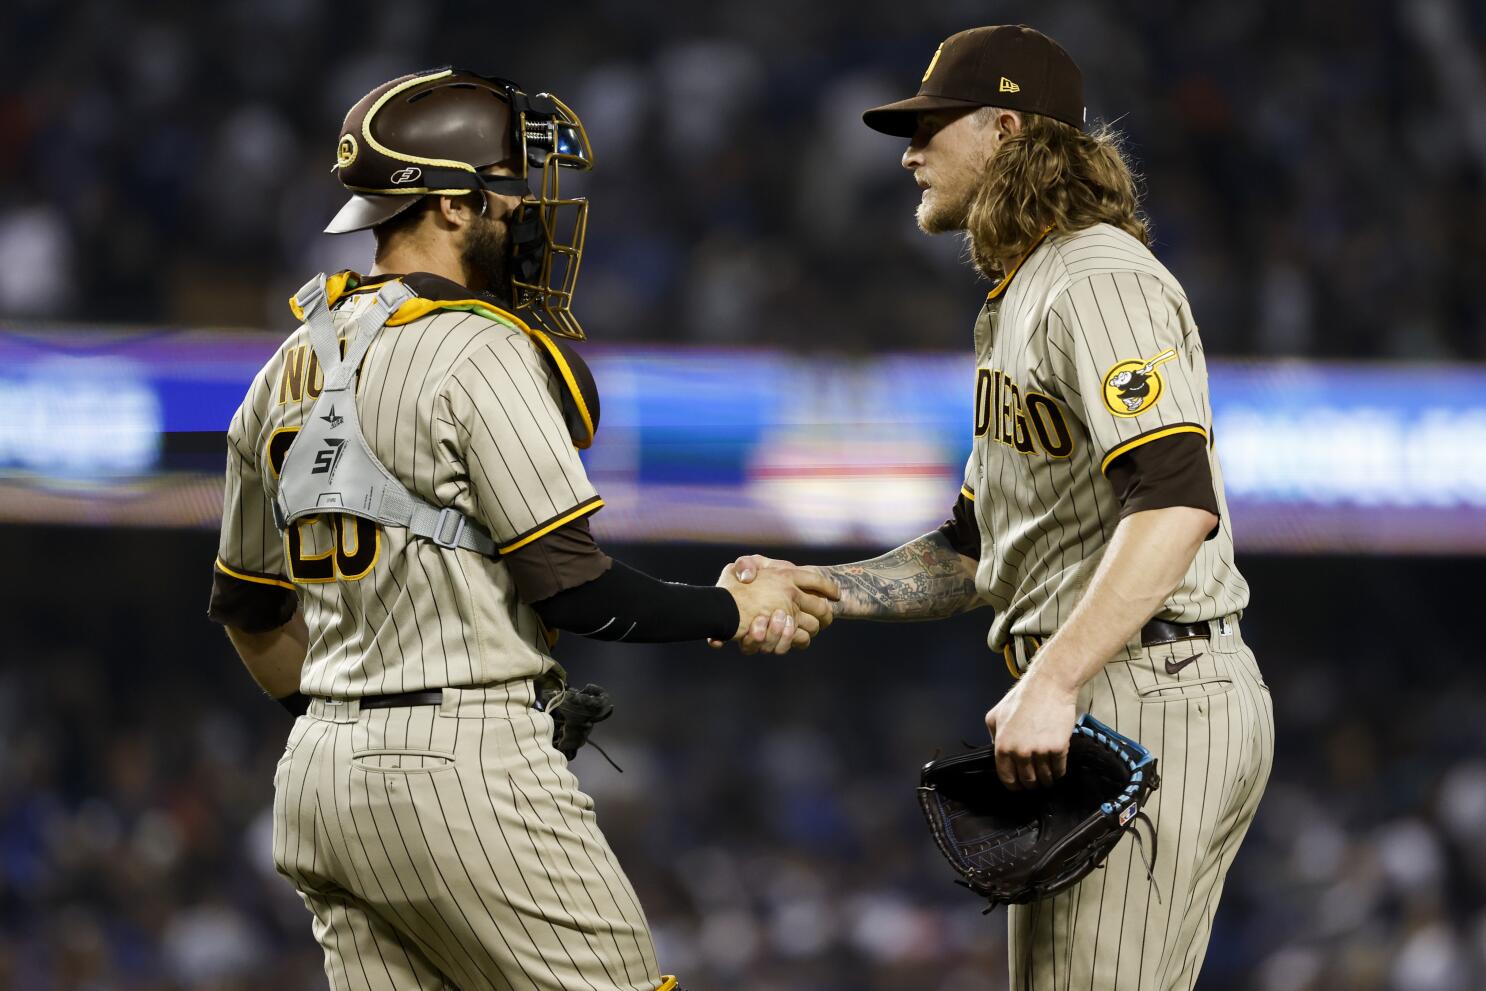 Padres vs. Dodgers: Early Odds and Preview for NLDS After Wild